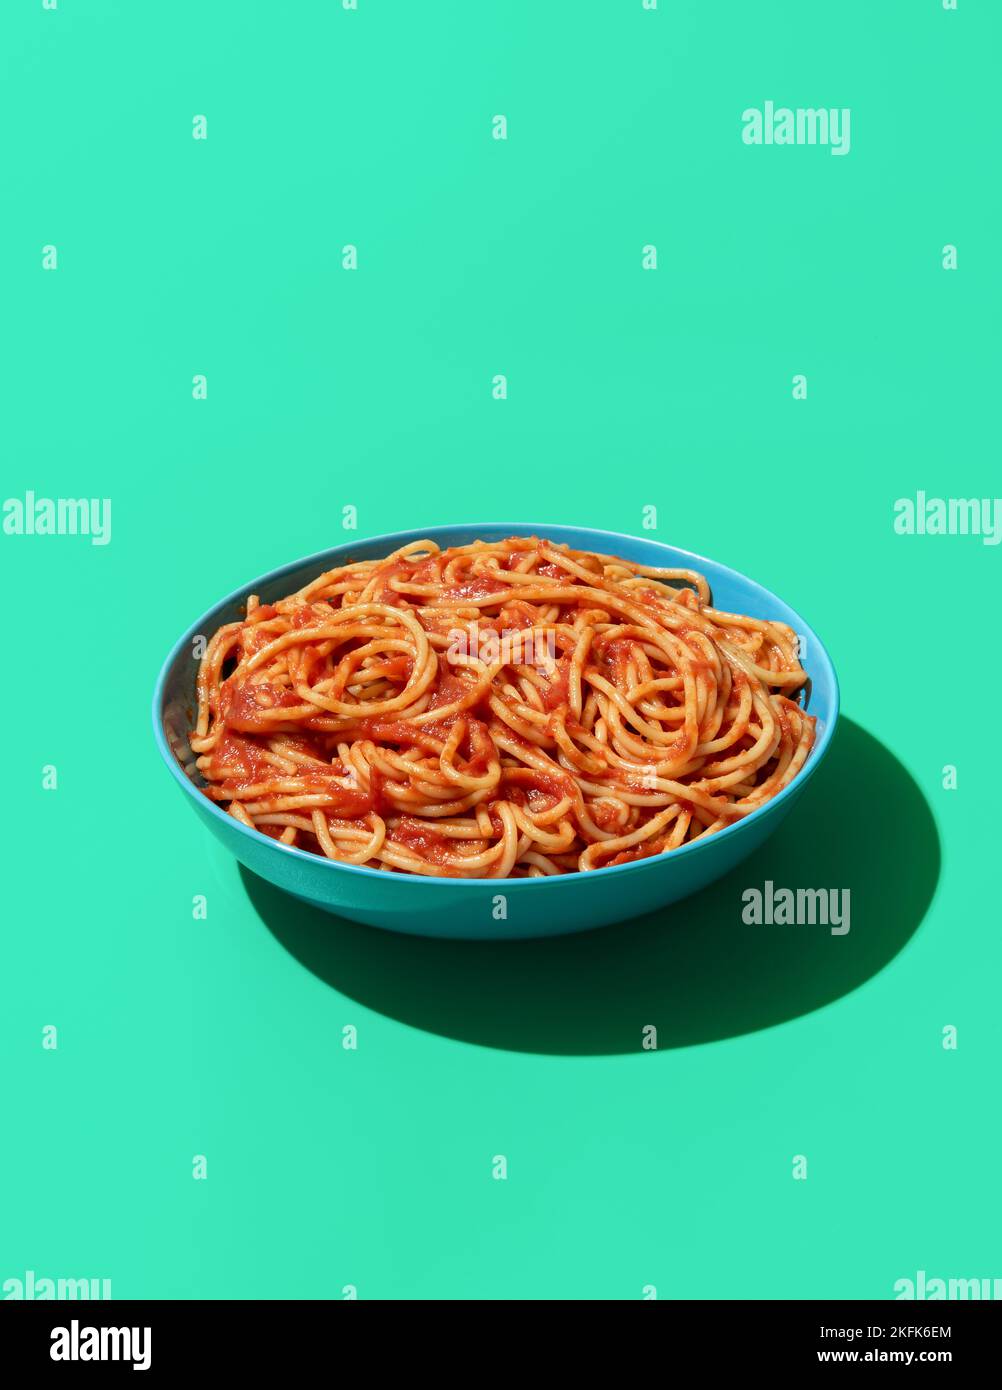 Bowl with spaghetti in tomato sauce minimalist on a green table. Pasta Pomodoro in a blue bowl in bright light on a green-colored background Stock Photo